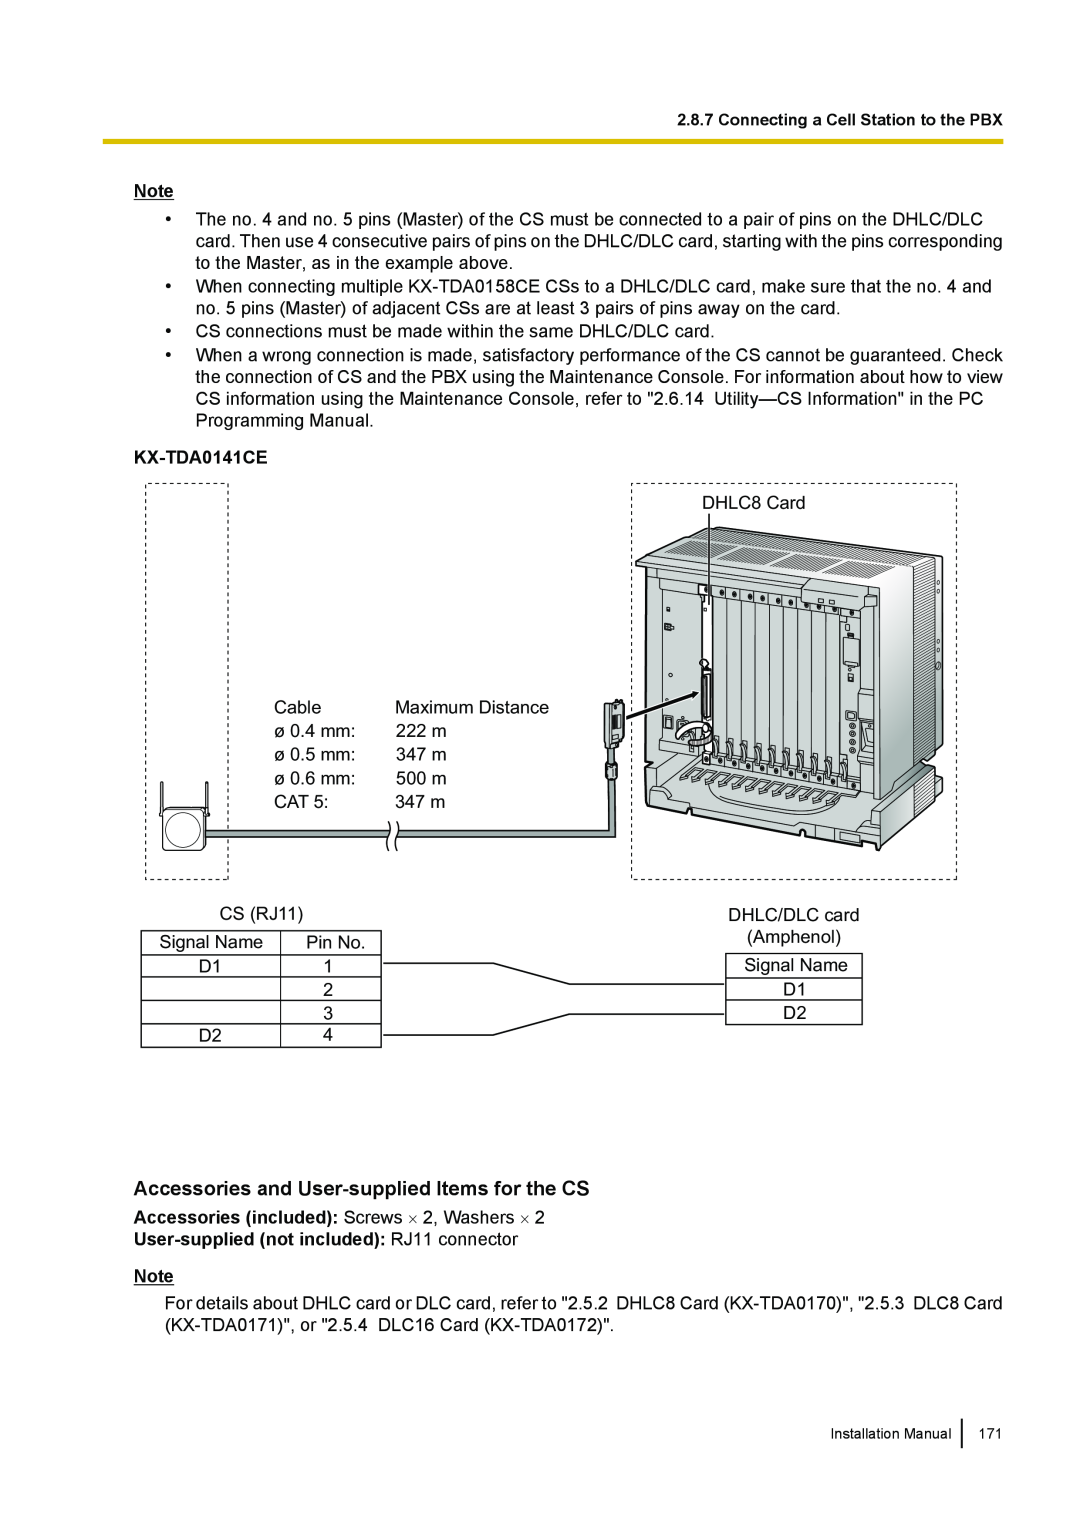 Panasonic KX-TDA100 installation manual Accessories and User-supplied Items for the CS, KX-TDA0141CE 